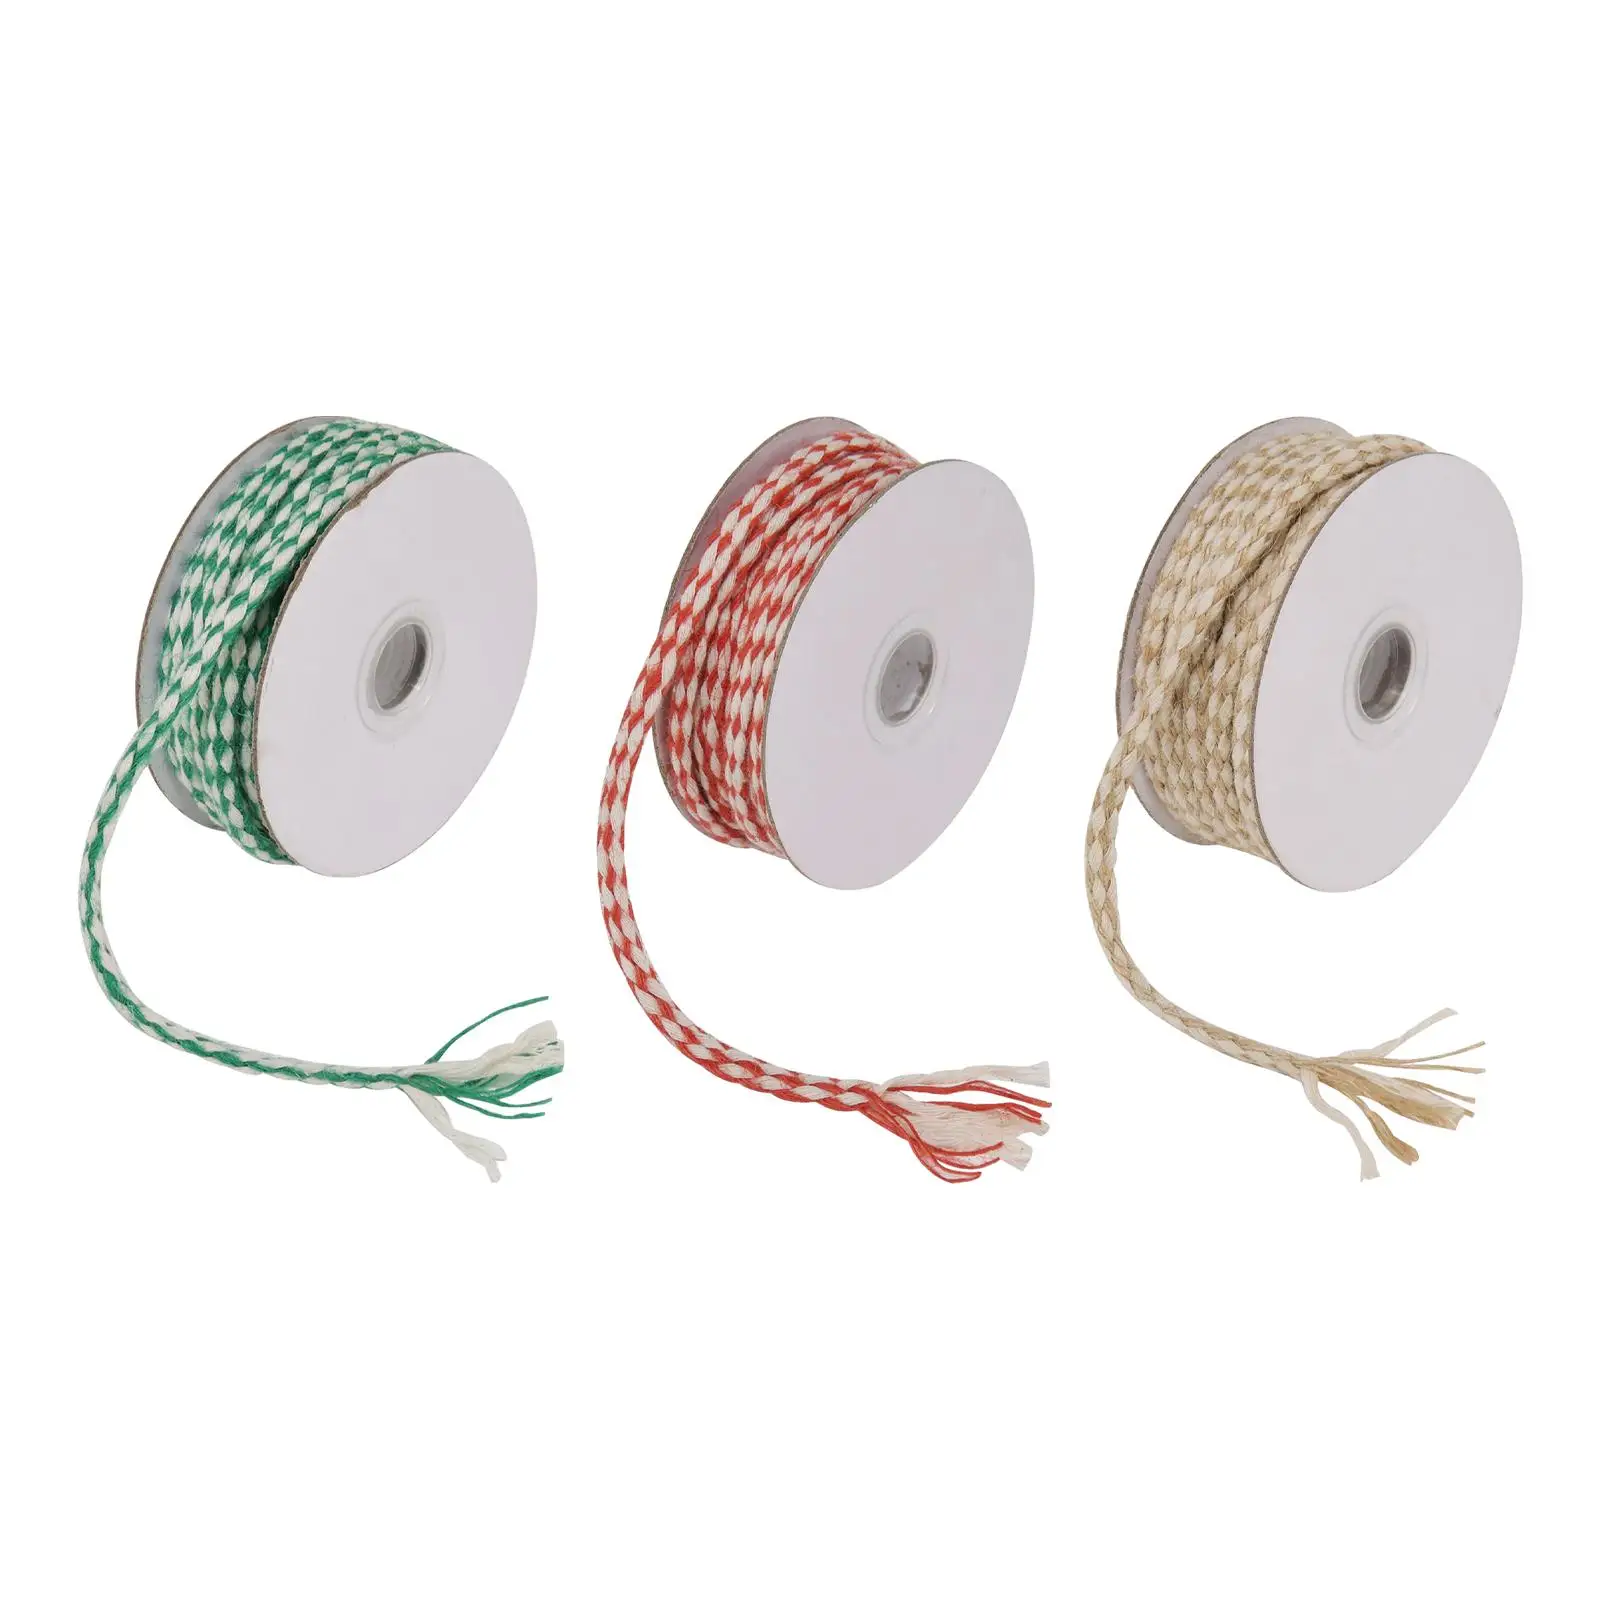 Gift Wrapping Cord String Garden Xmas DIY Crafts Hanging and Packing Arts and Crafts 10 Meters Jute String Twine Decoration